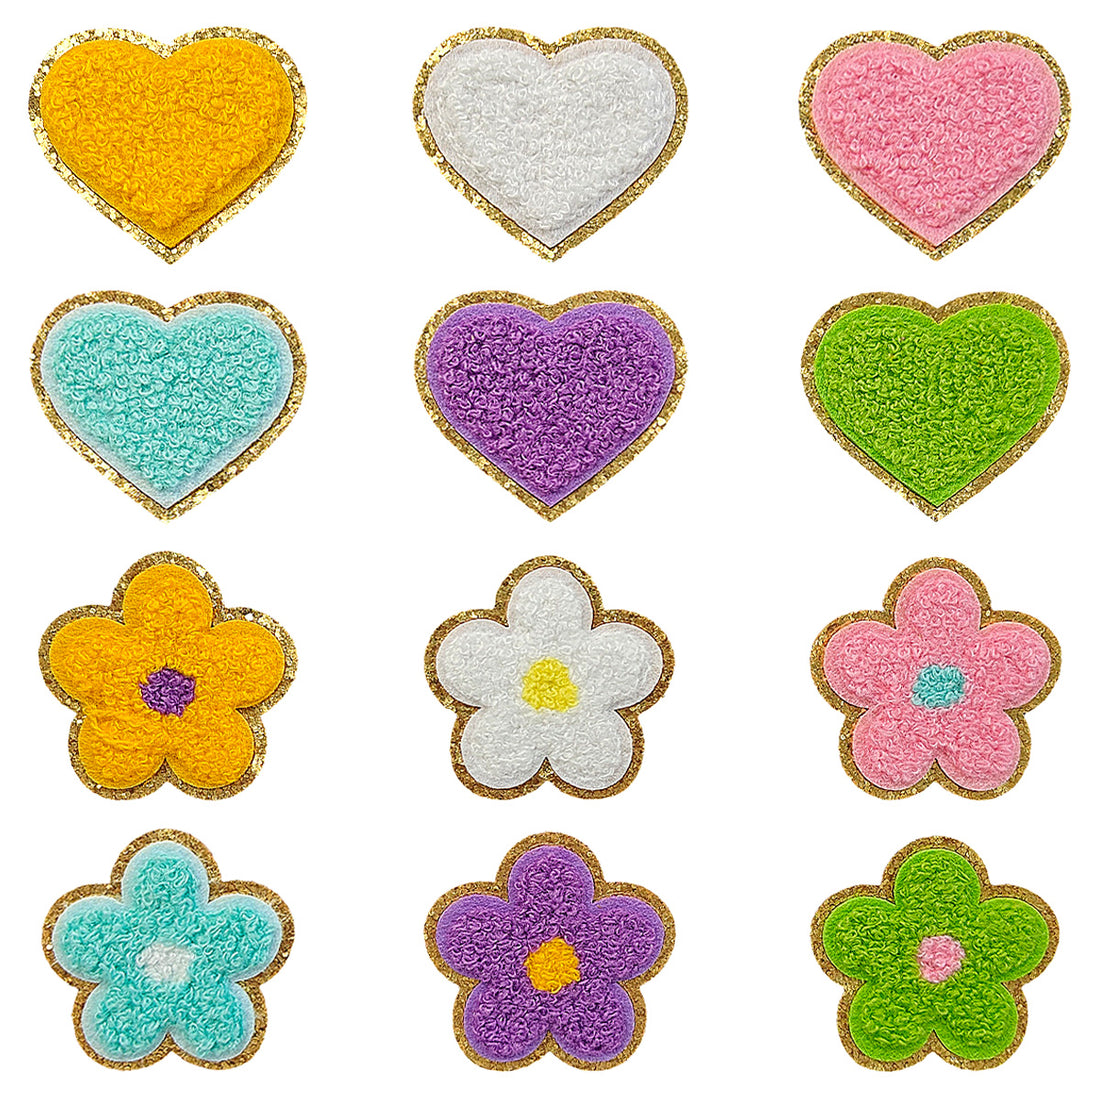 12PCS Heart Chenille Patches, Flower Chenille Patches, Bright Vivid Colors, Sew on/Iron on Glitter Patch Applique for Clothes, Dress, Hat, Jeans, DIY Accessories